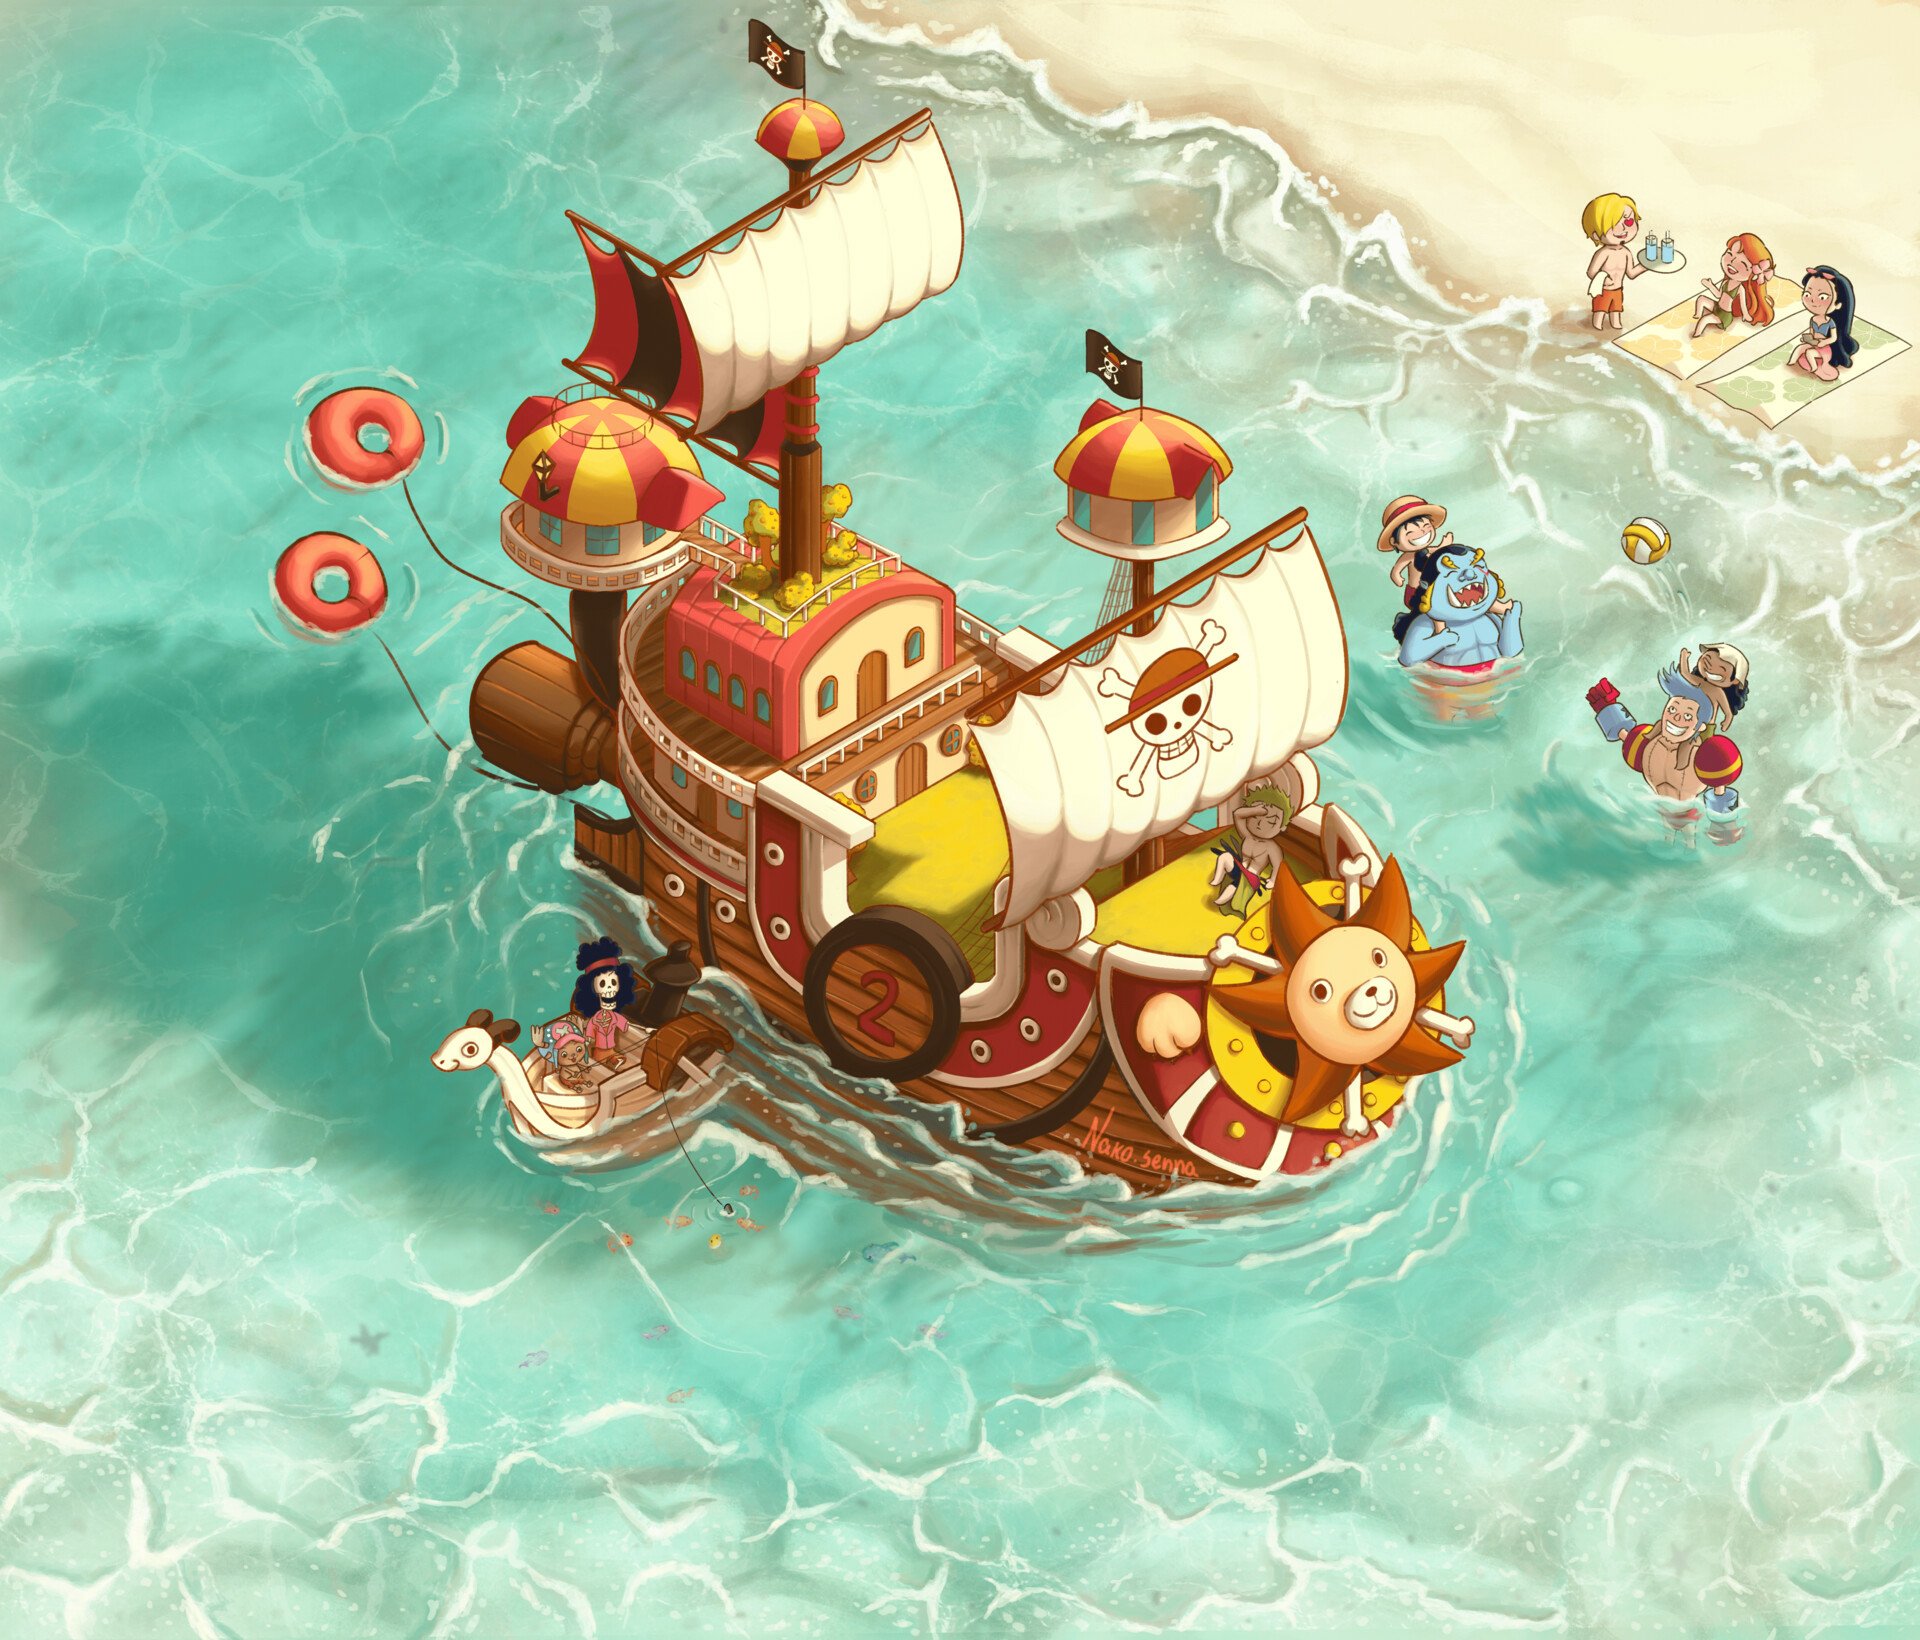 Going Merry and thousand sunny, One Piece anime, HD Wallpaper